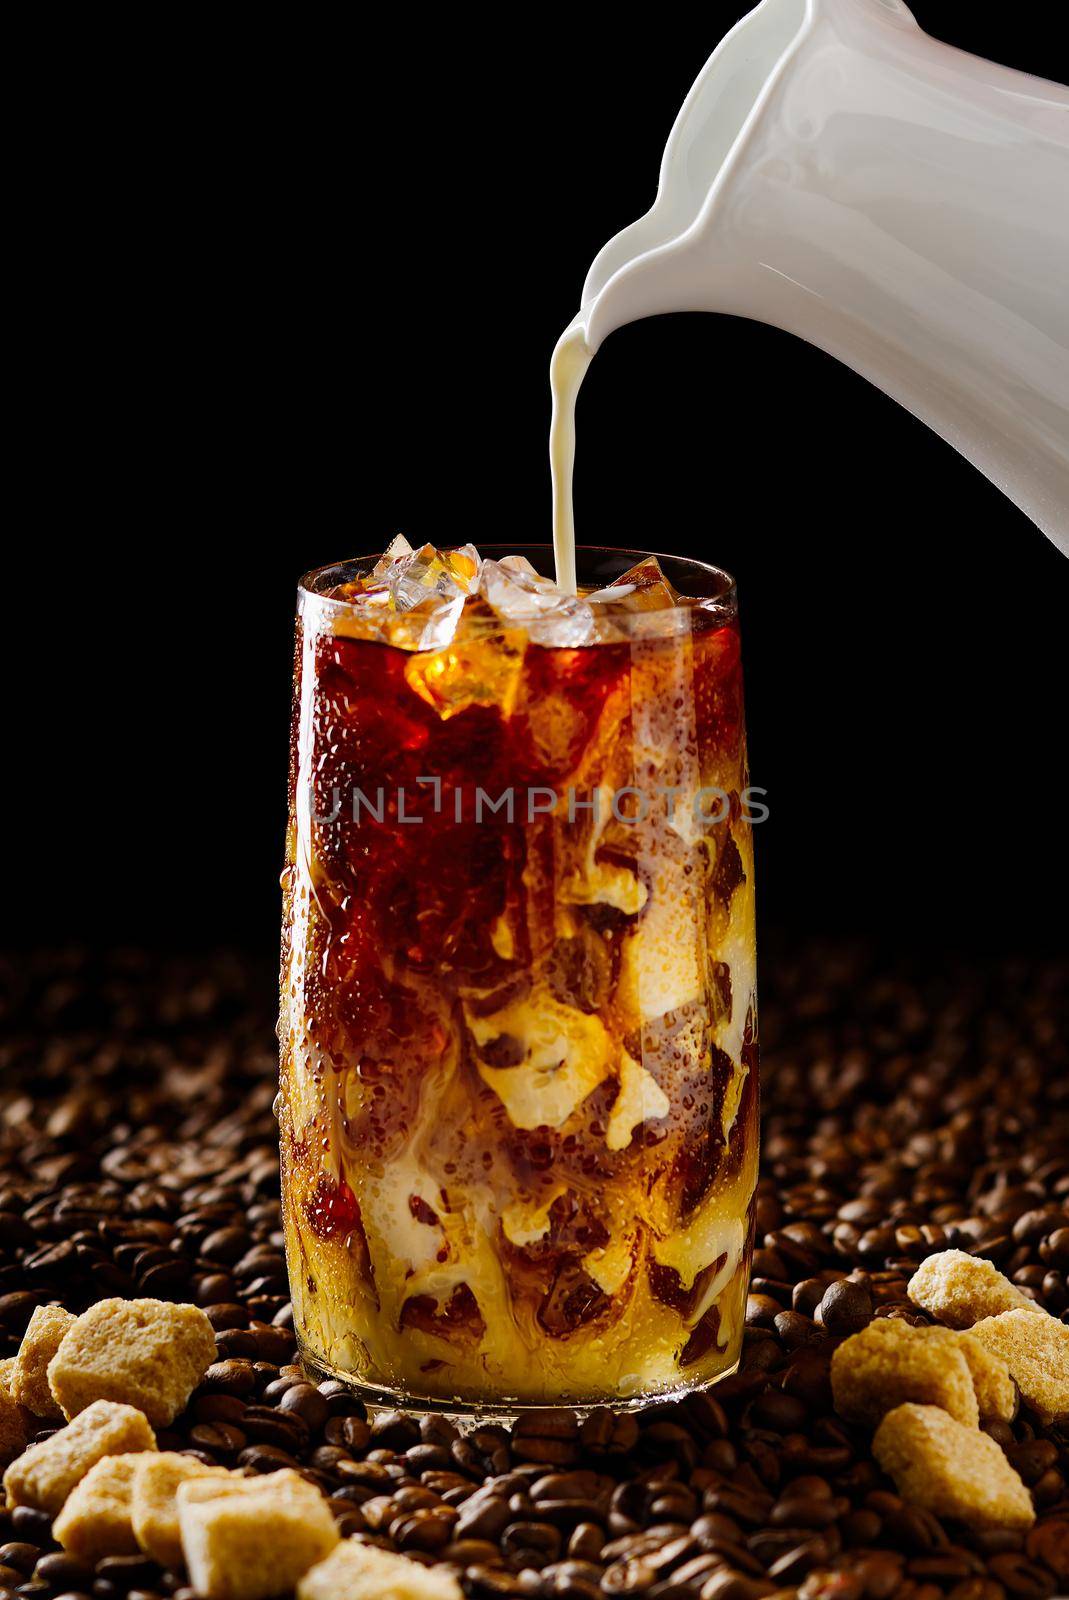 Tasty Iced coffee. Tasty ice coffee with milk, cold drink in glass with ice on dark coffee background Copy space.